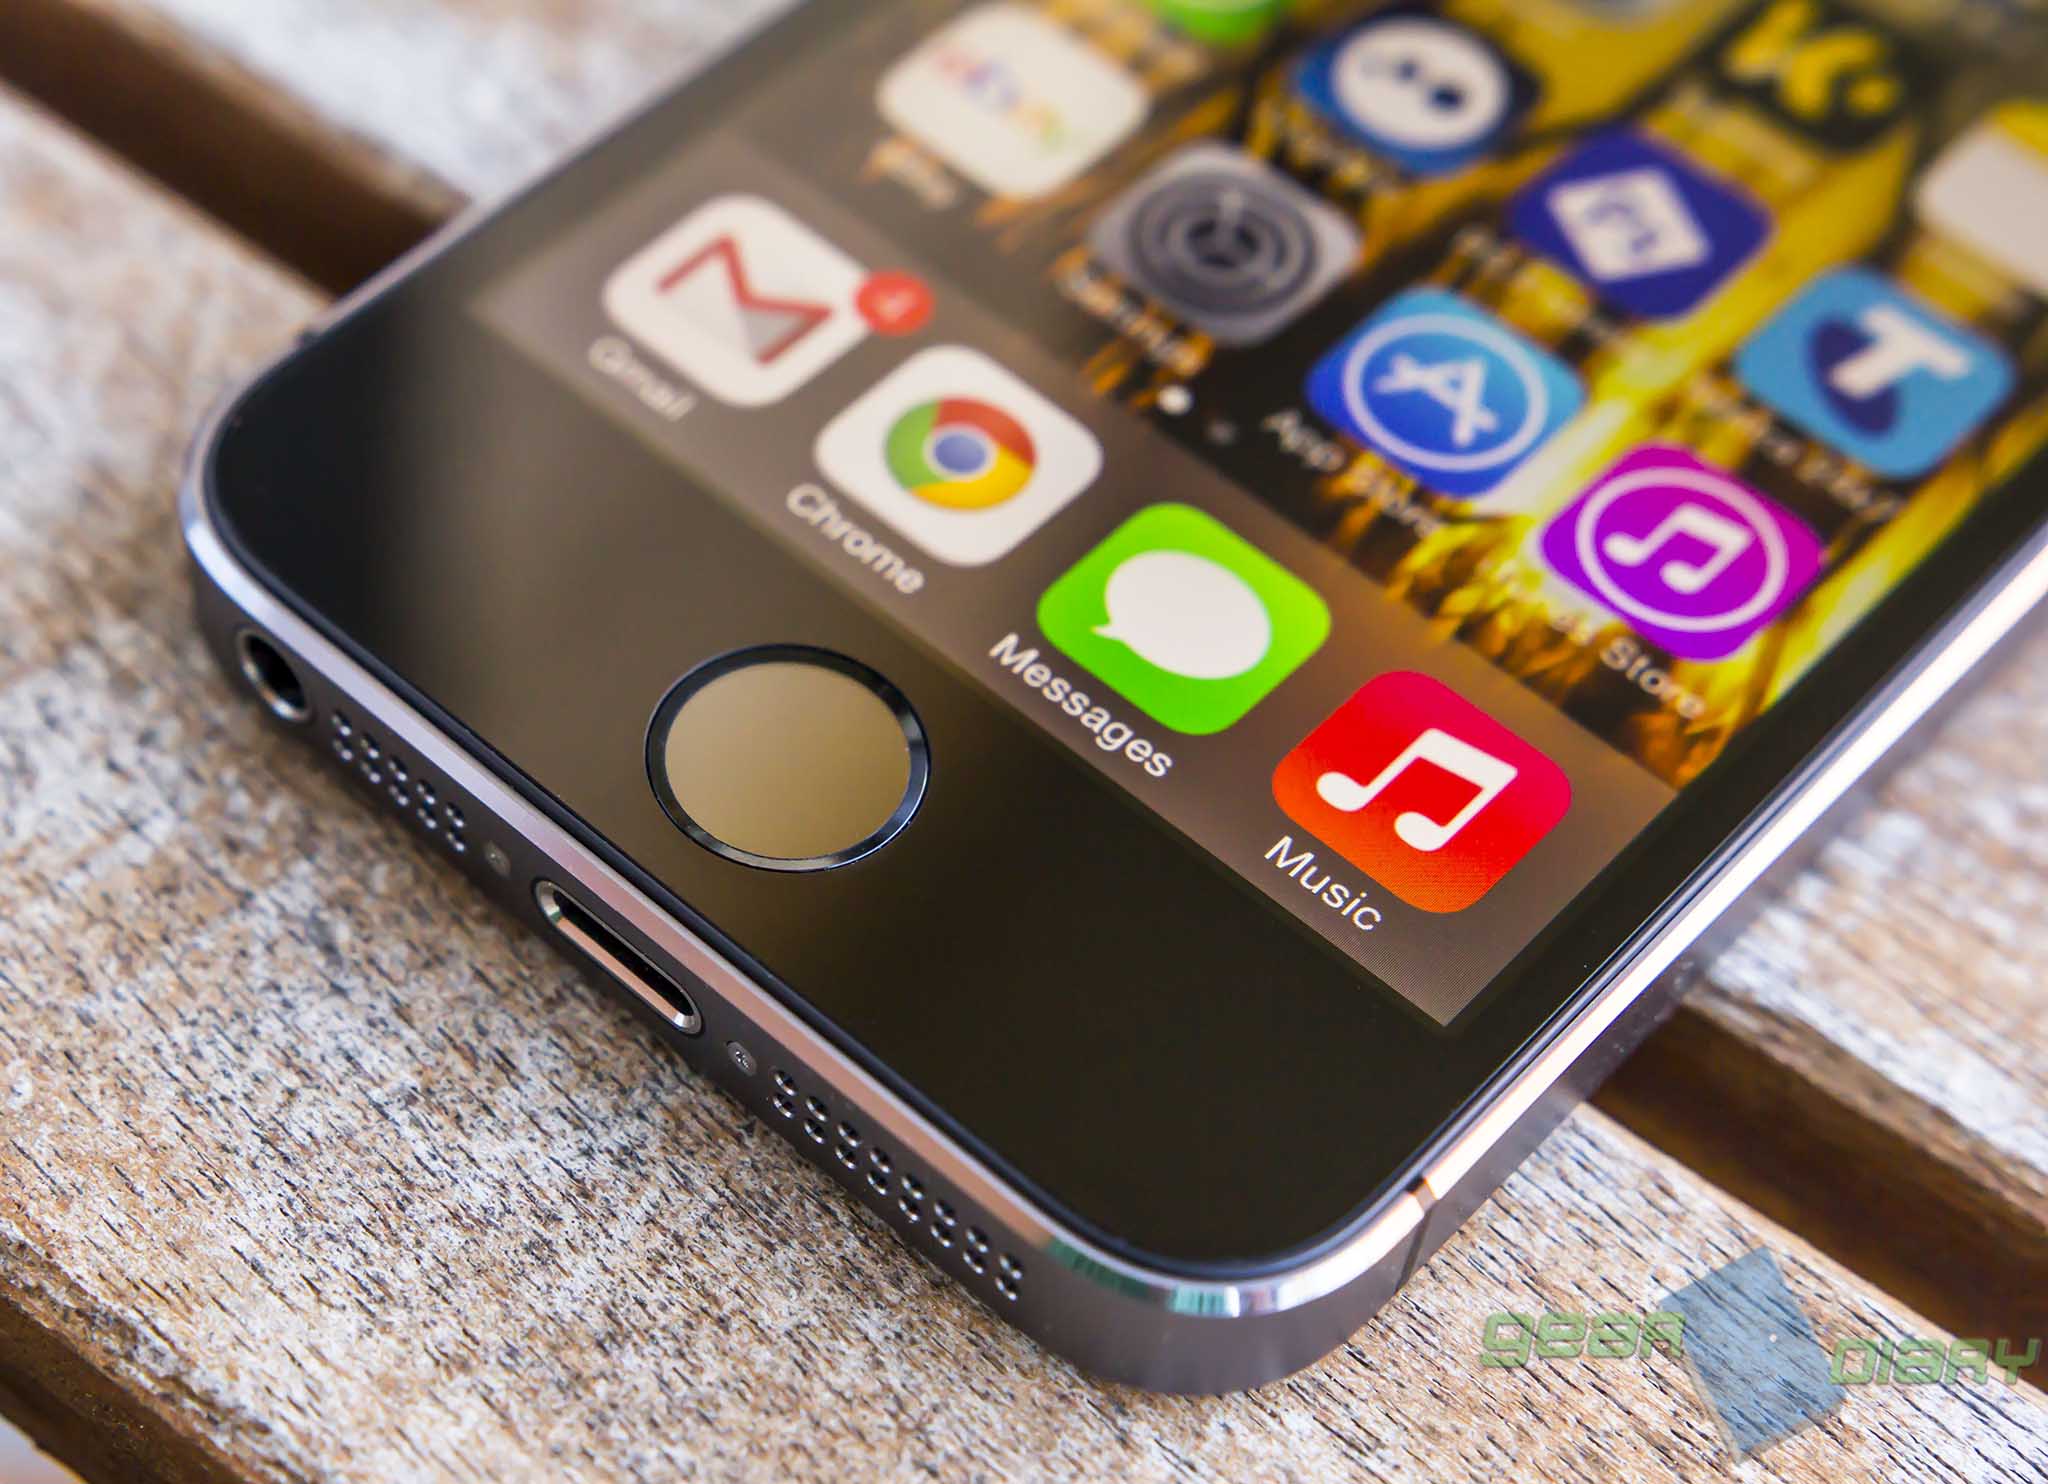 Apple iPhone 5s Review: Speed, Shades, and Scanners